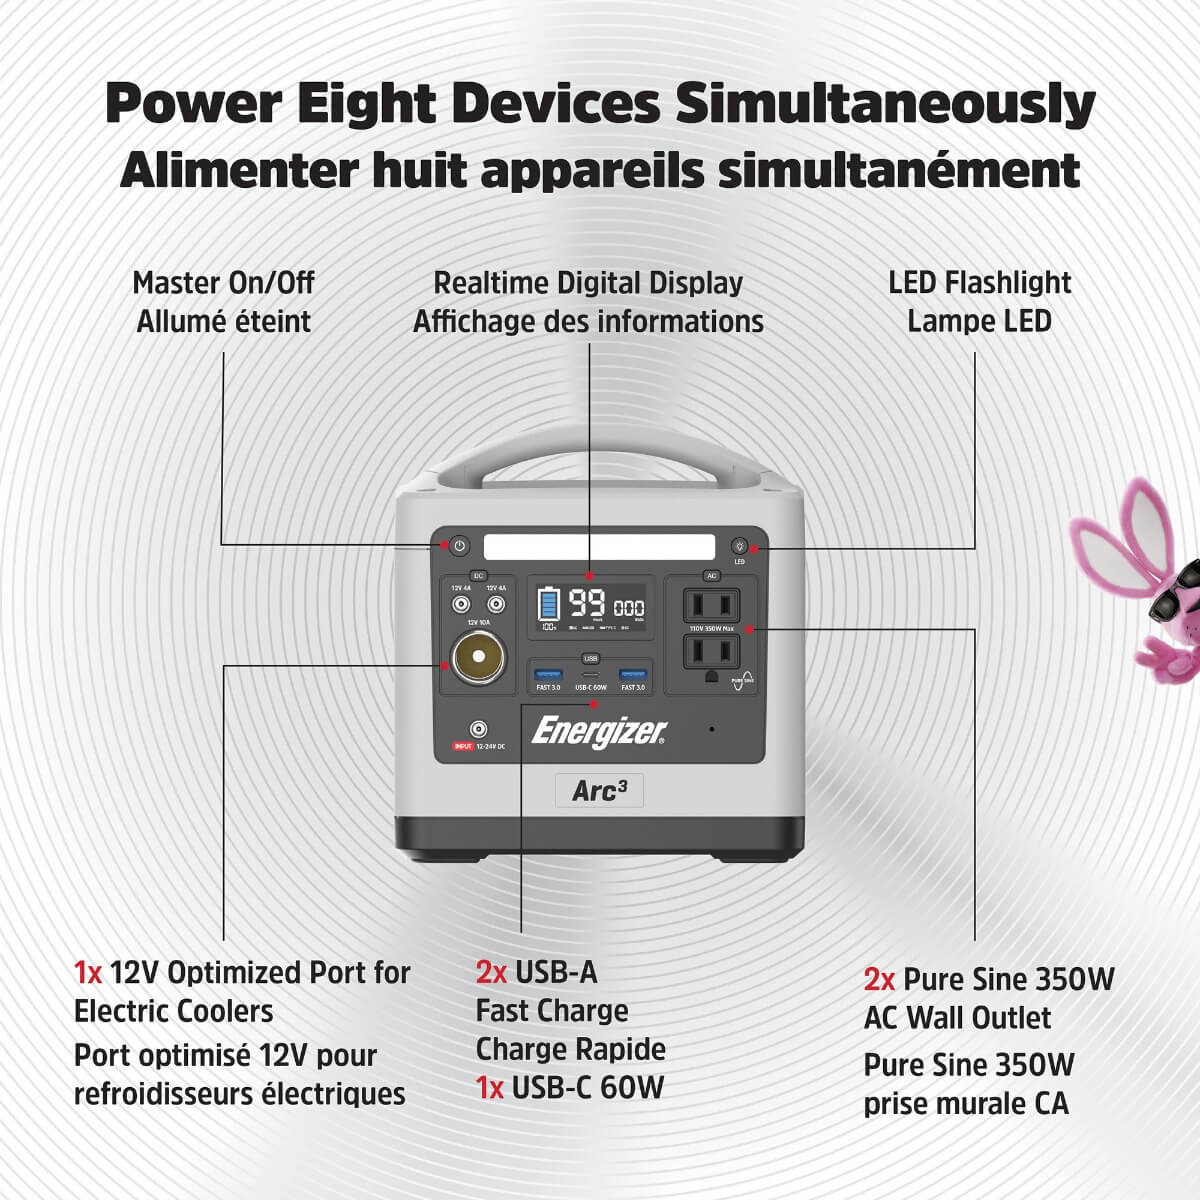 Energizer Arc3 Portable Power Station Battery By Use Energizer   